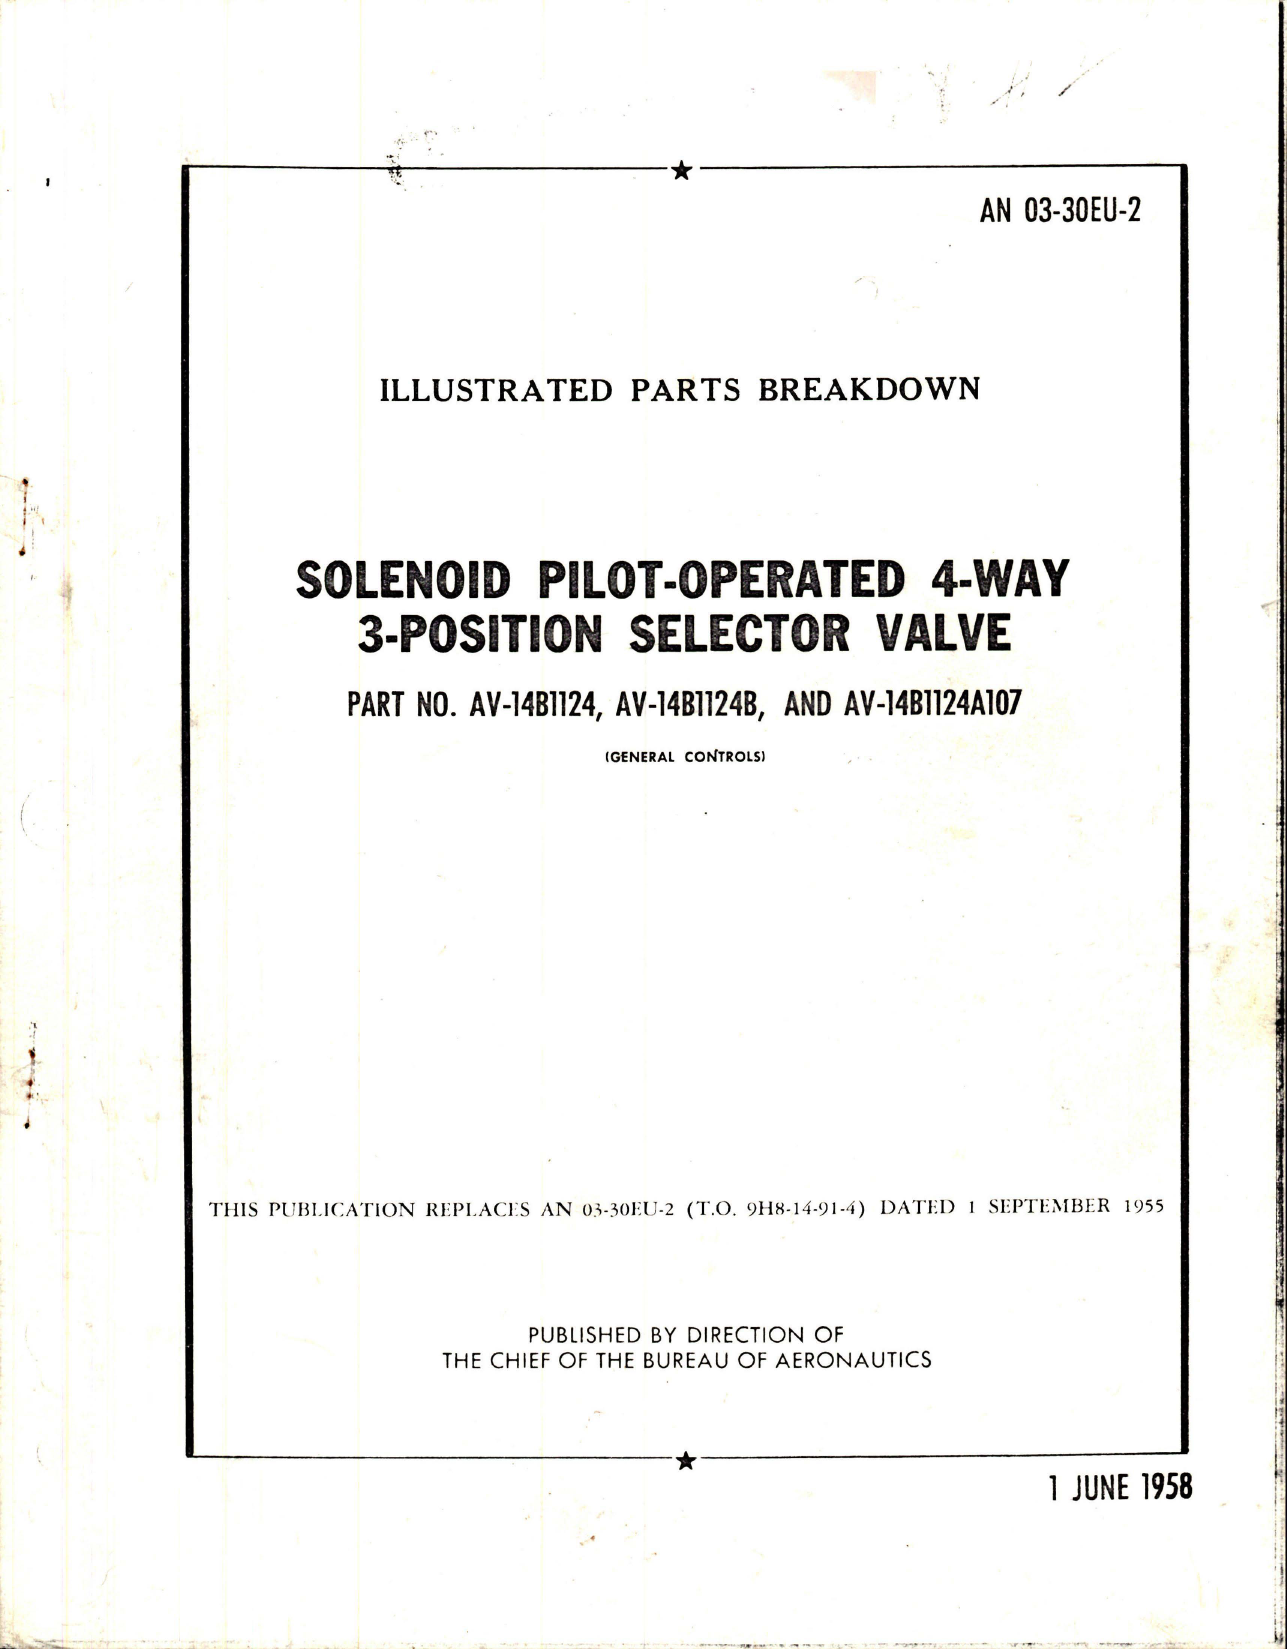 Sample page 1 from AirCorps Library document: Illustrated Parts Breakdown for Solenoid Pilot Operated 4-Way 3-Position Selector Valve